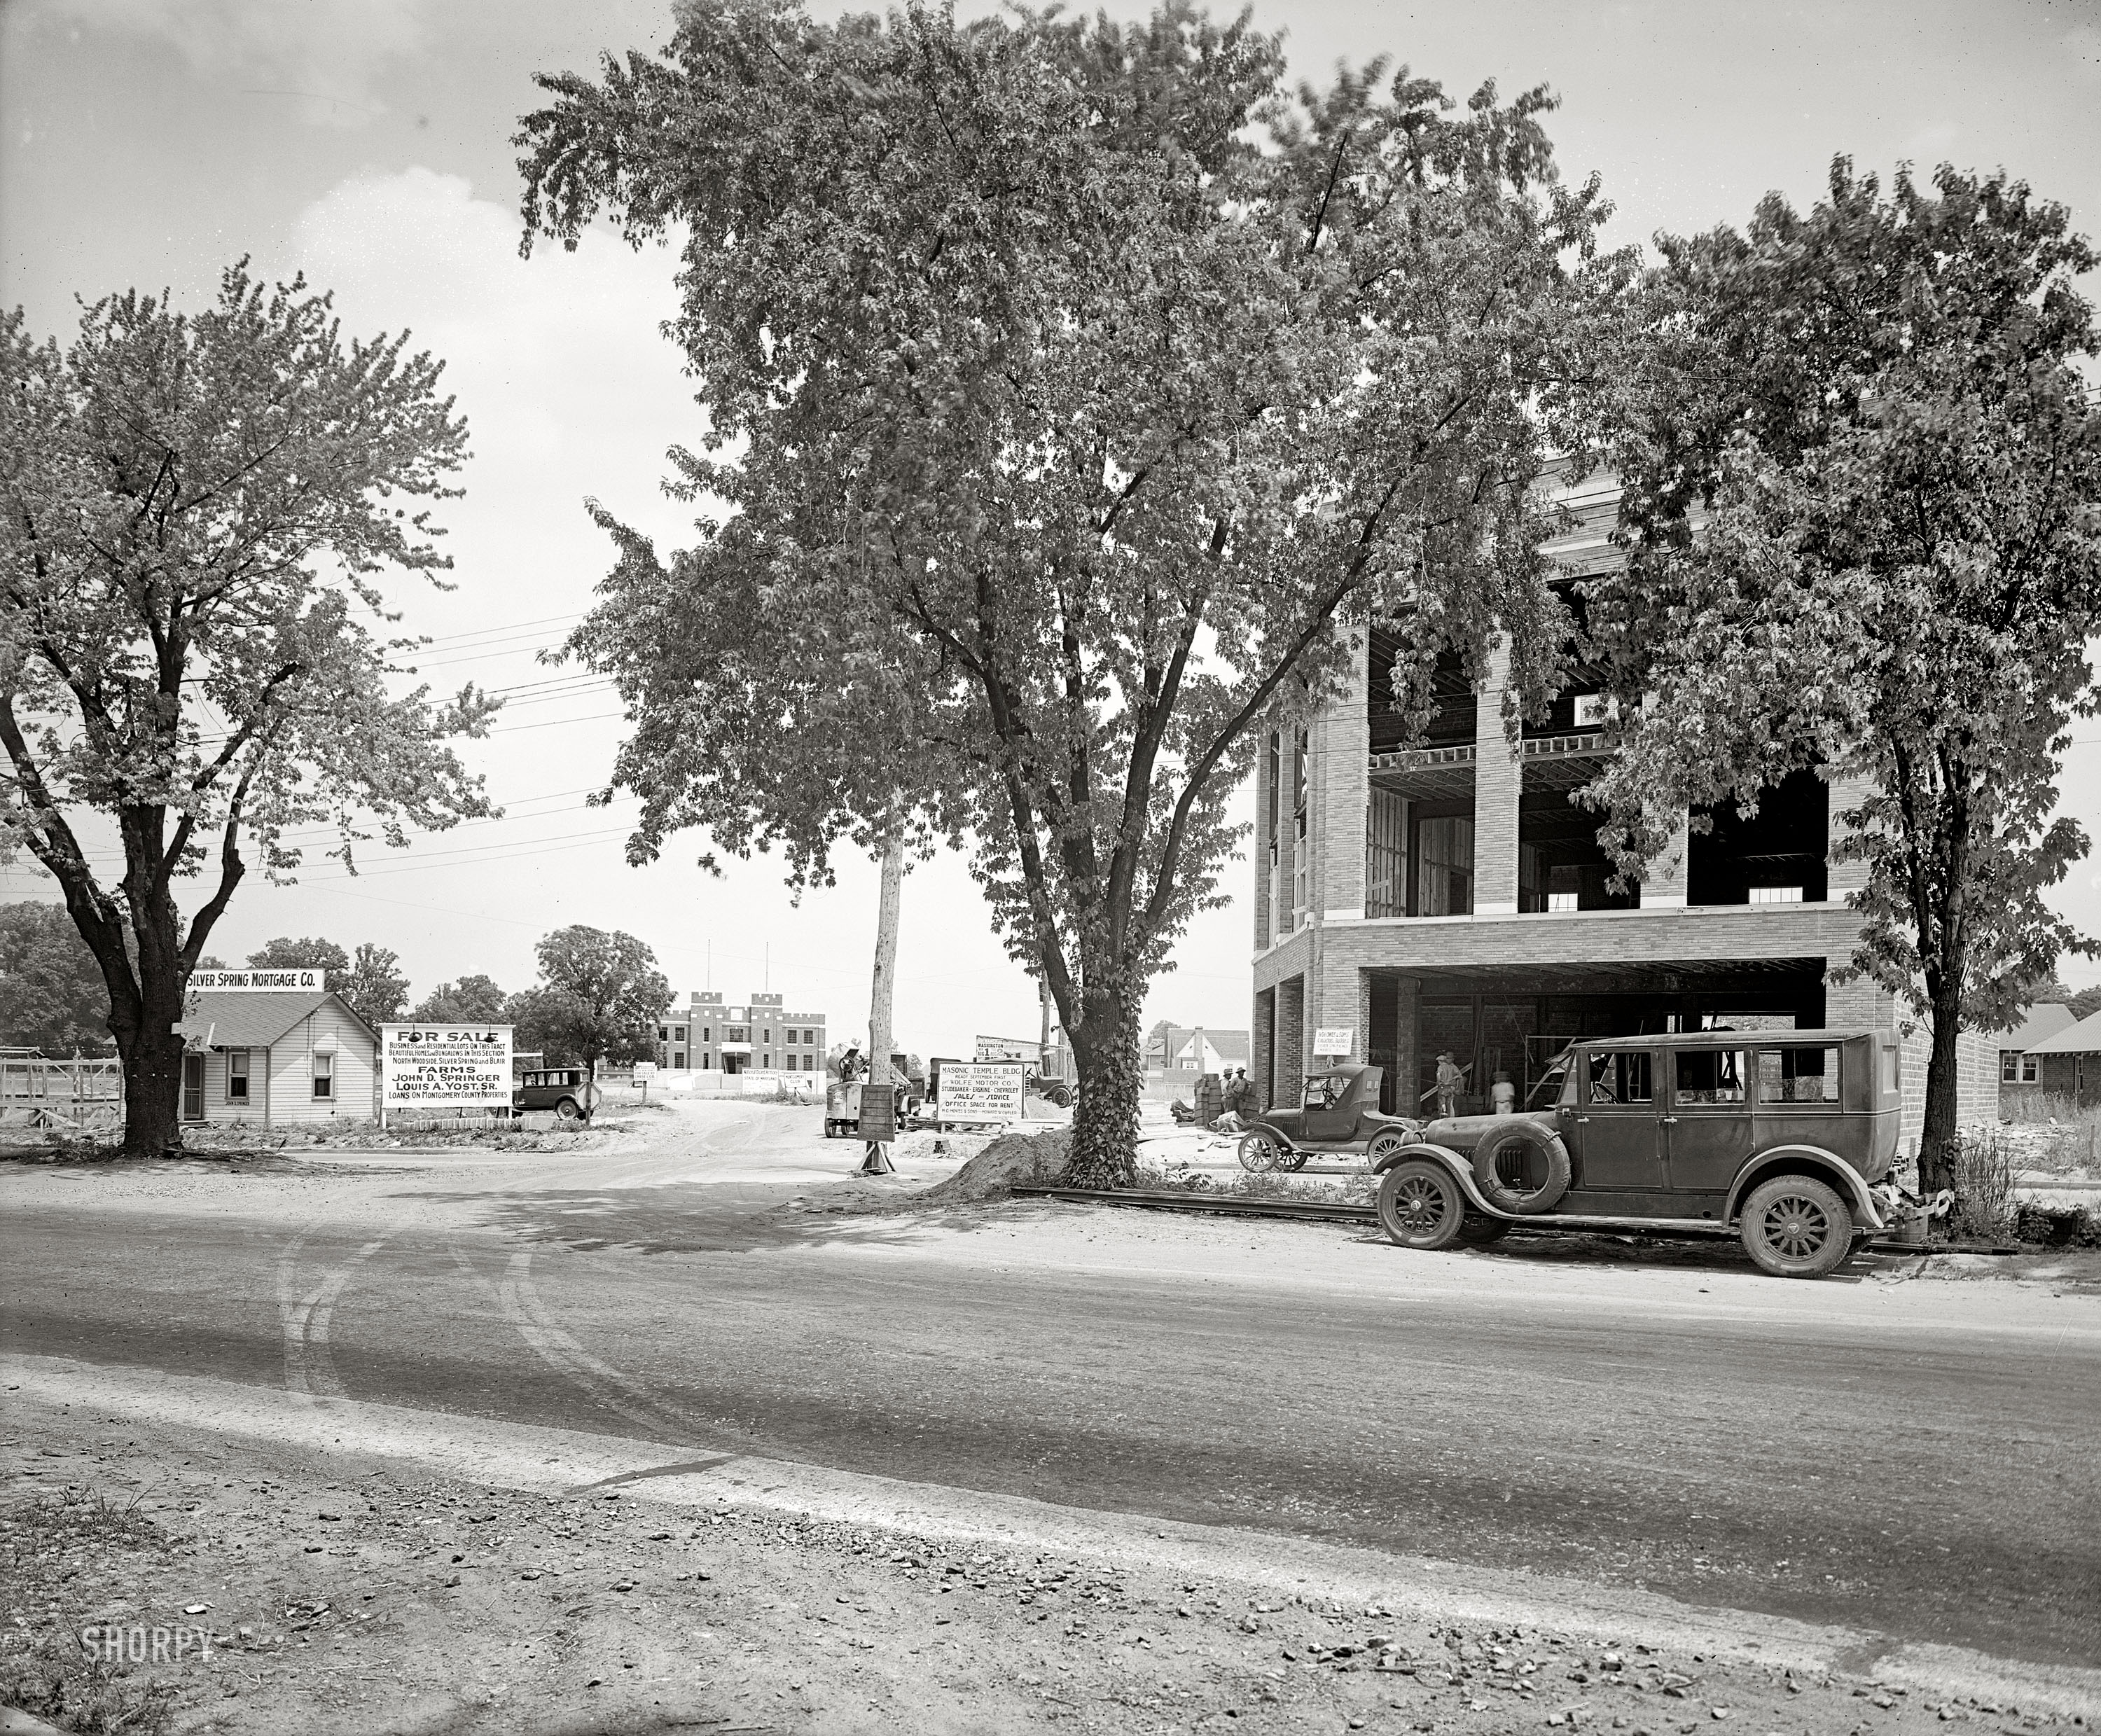 Silver Spring, Maryland, circa 1927. The second of three National Photo glass negatives marked "Jordan & Co." Among the new construction shown here is a National Guard armory. National Photo Company Collection. View full size.